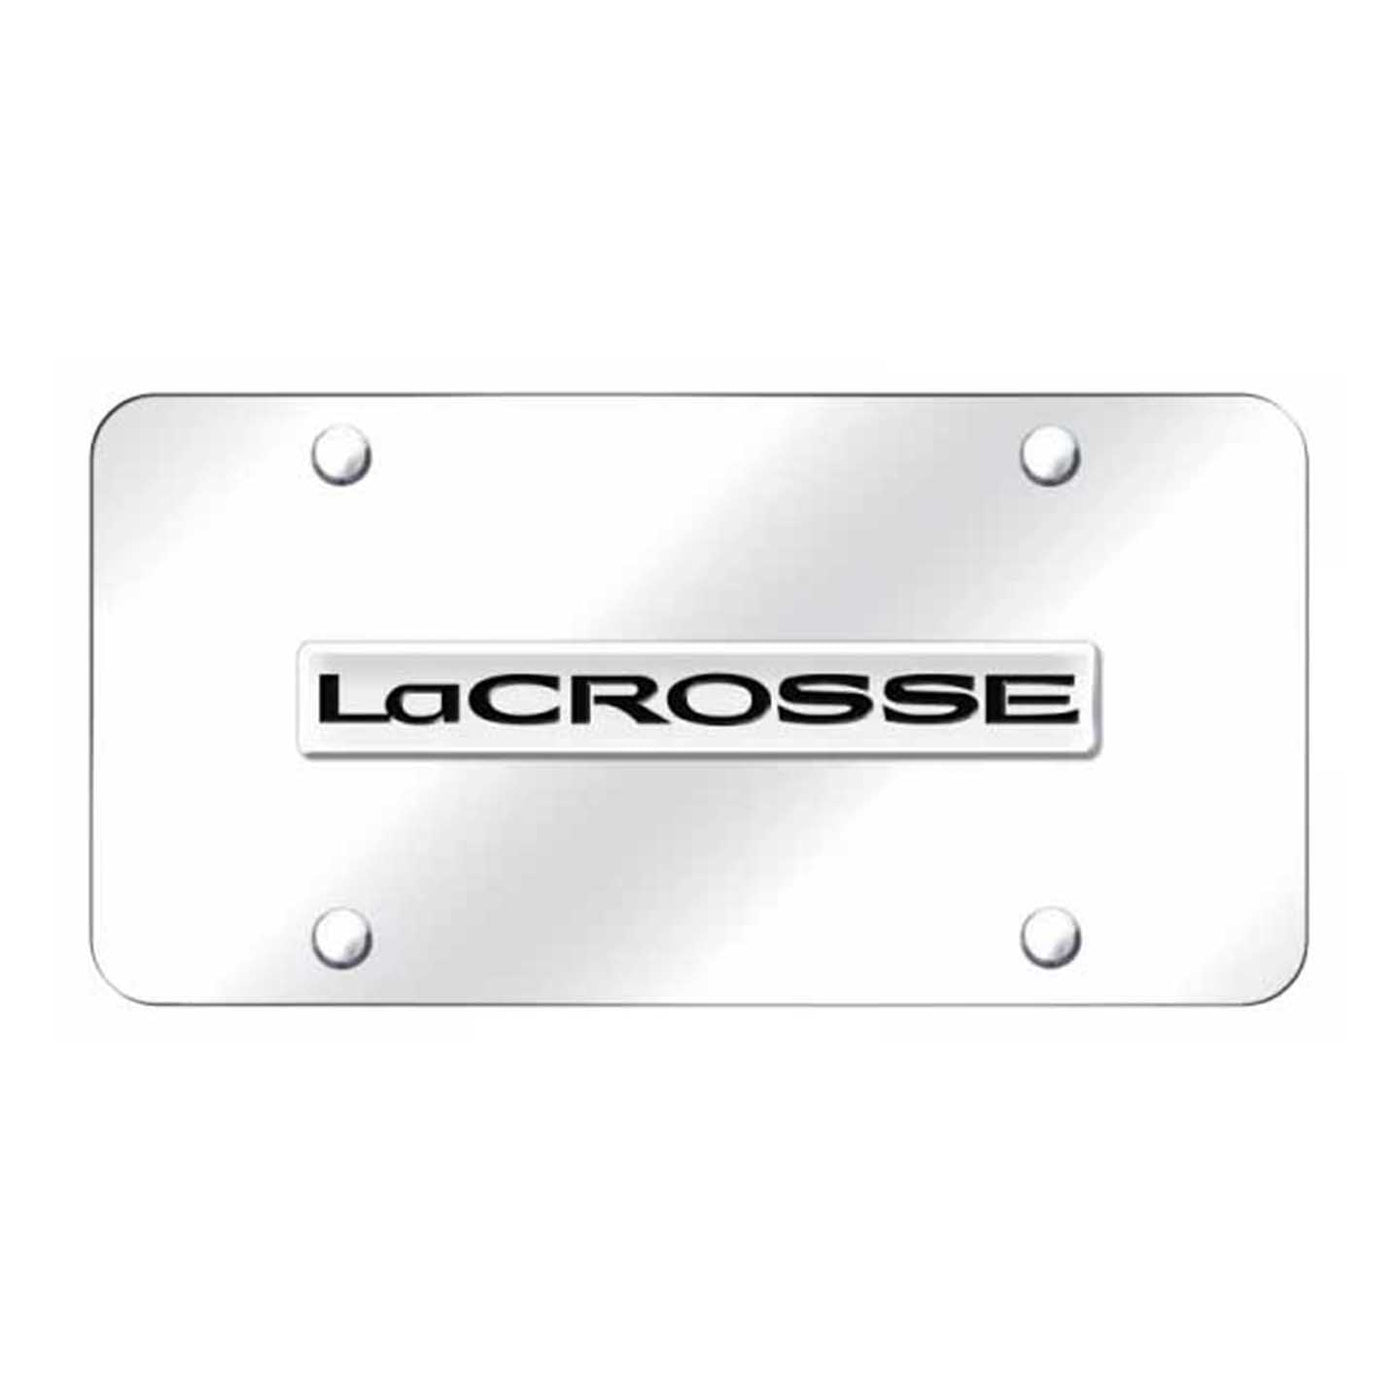 LaCrosse Name License Plate - Chrome on Mirrored